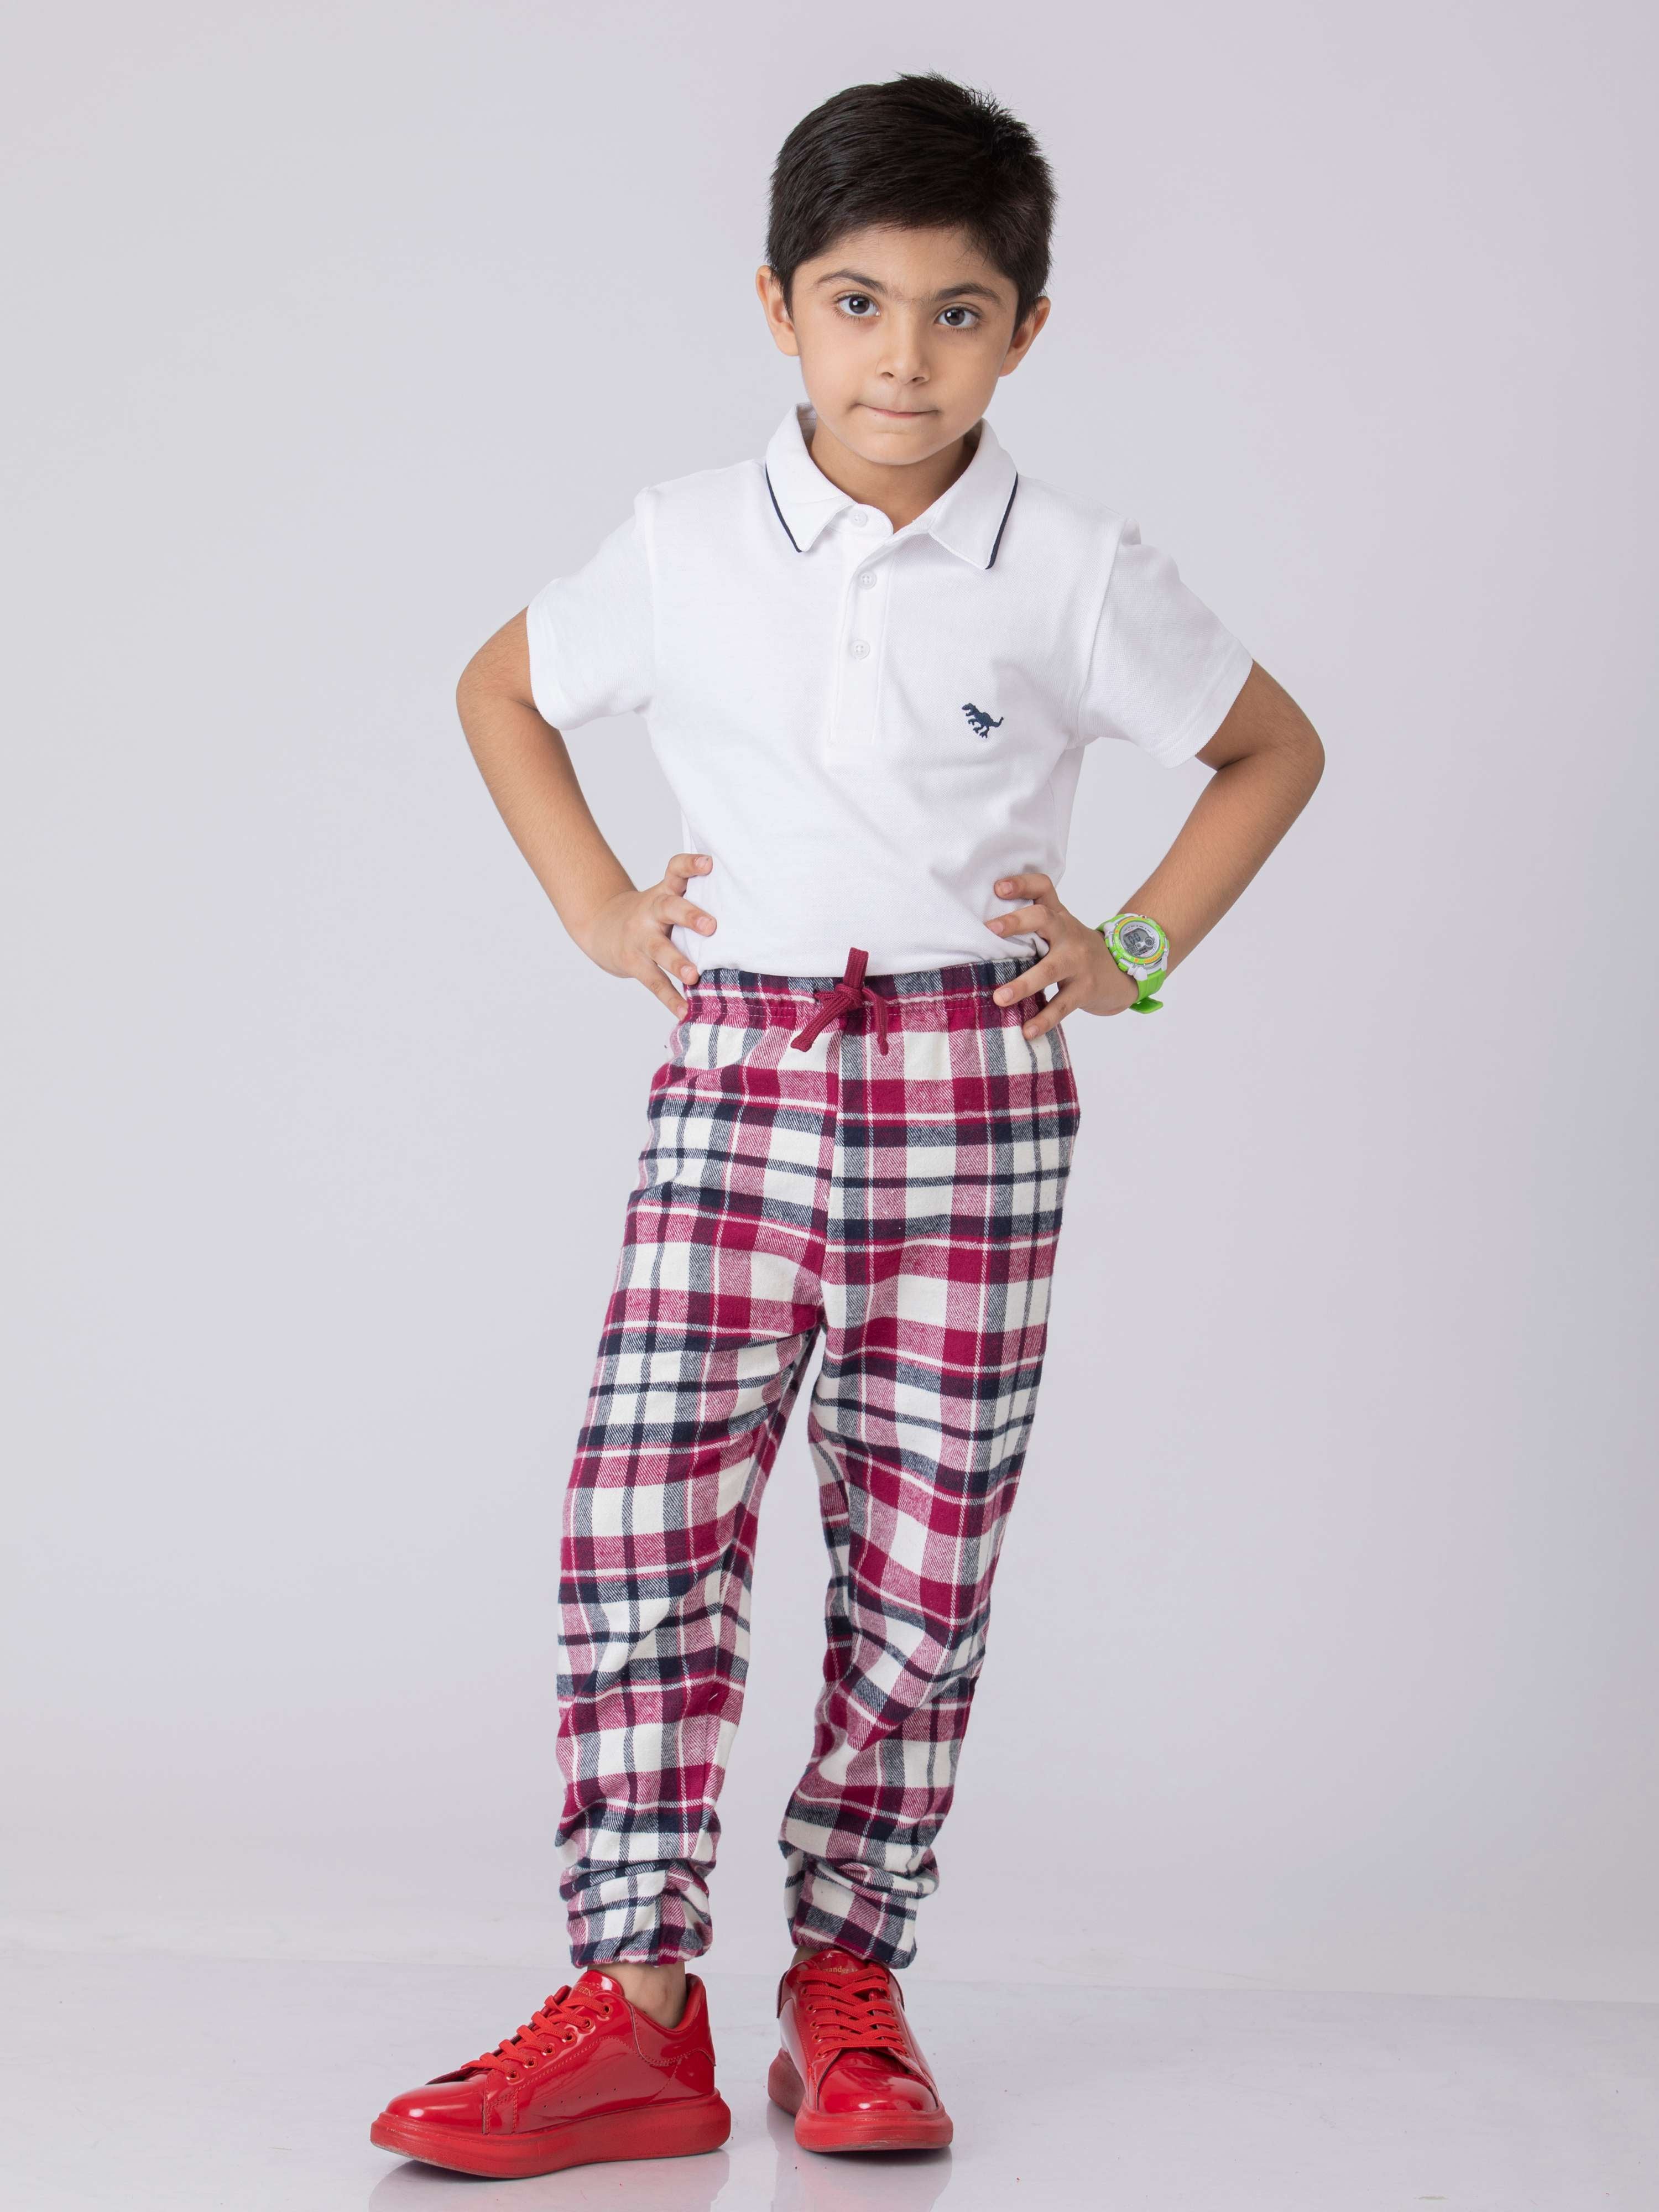 Natural Cotton Trousers / Formal Boys Trousers / Checked Pants / Many  Colors and Patterns 74/12m-140/10 / Ring Bearer Pants Outfit - Etsy